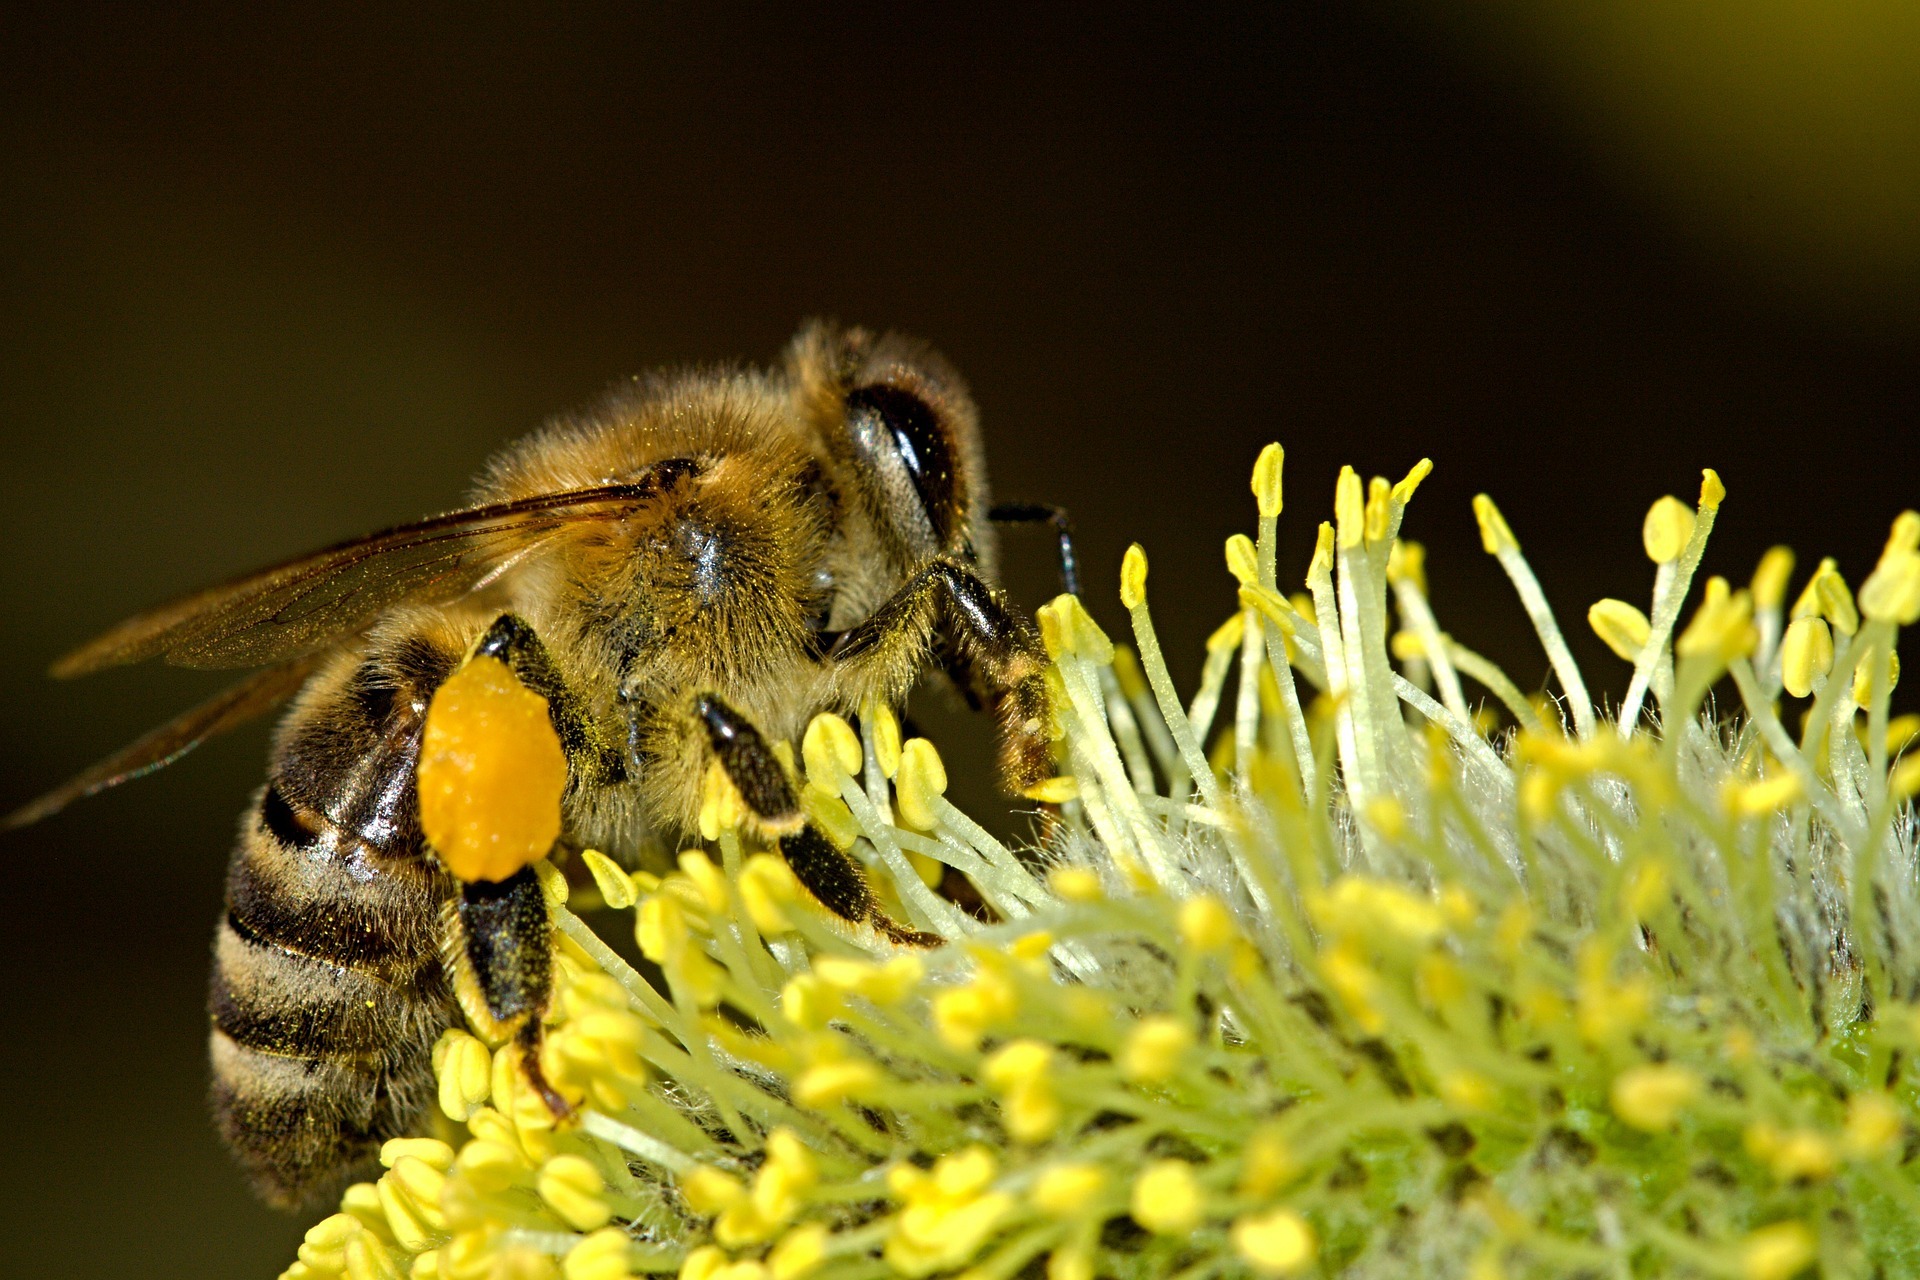 Honey bees fill 'saddlebags' with pollen. Here's how they keep